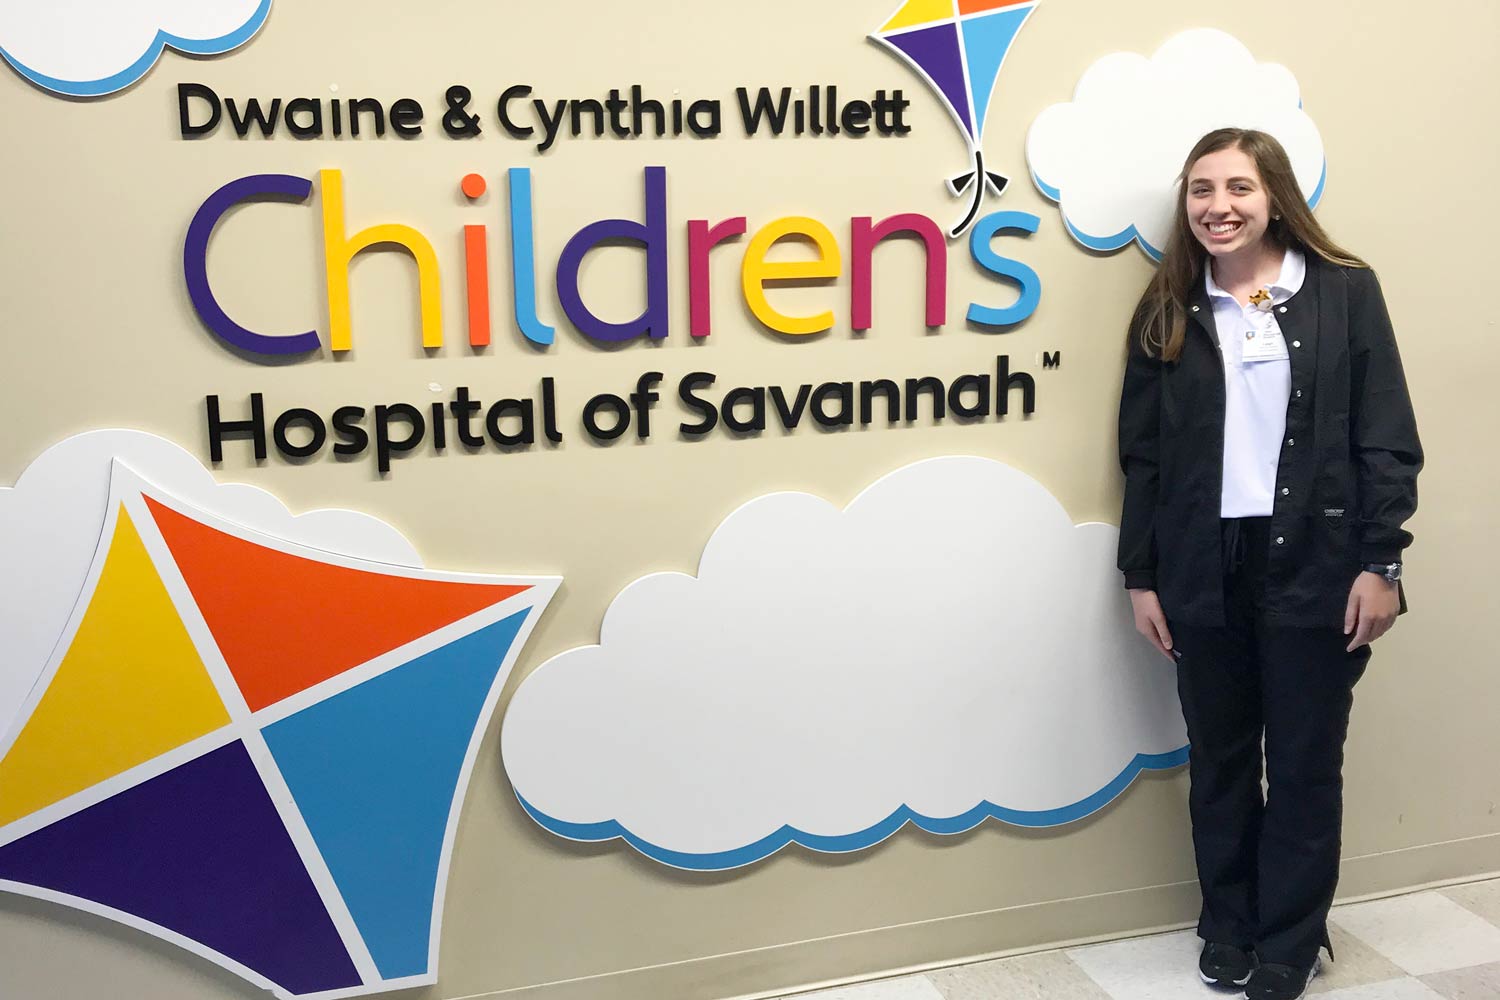 Leigh standing in front of the Children's Hospital of Savannah wall sign.